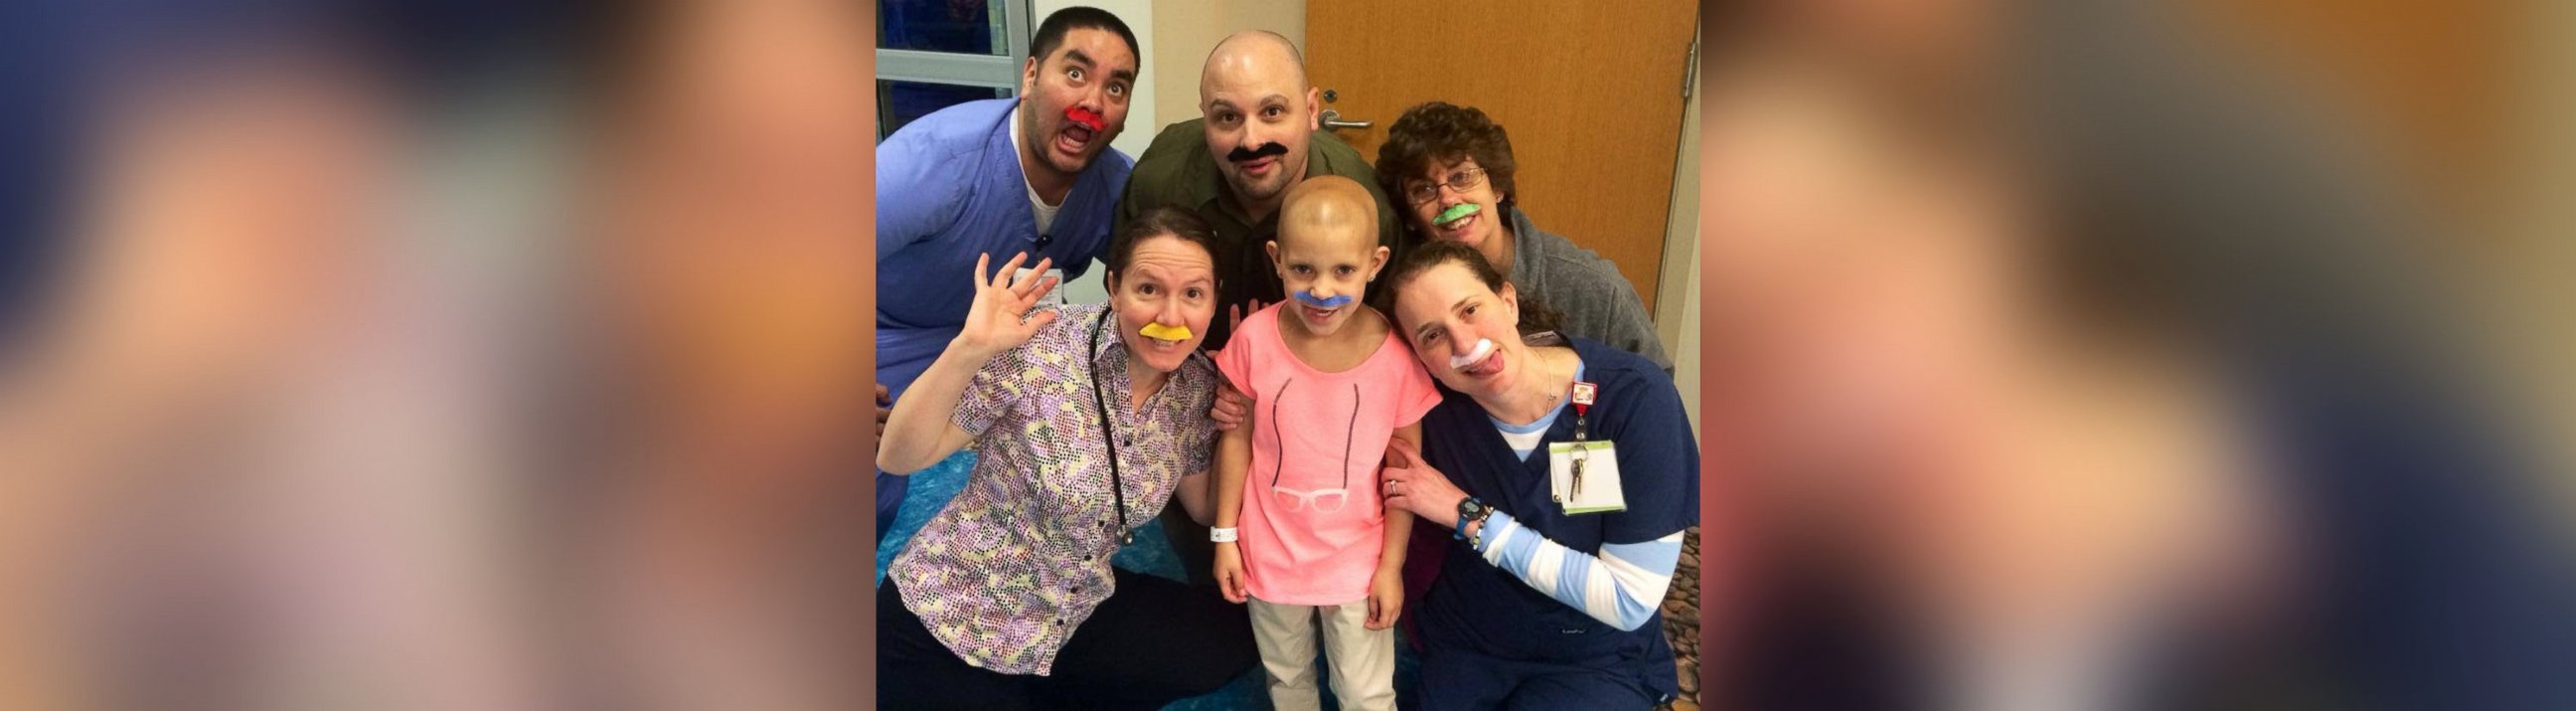 PHOTO: Kaylee Rios, center, is facing her third battle with Neuroblastoma. Roc Solid Foundation, a nonprofit that builds hope for kids fighting cancer, has launched The Kaylee Rios Project to collect mustache designs to be featured on a t-shirt.